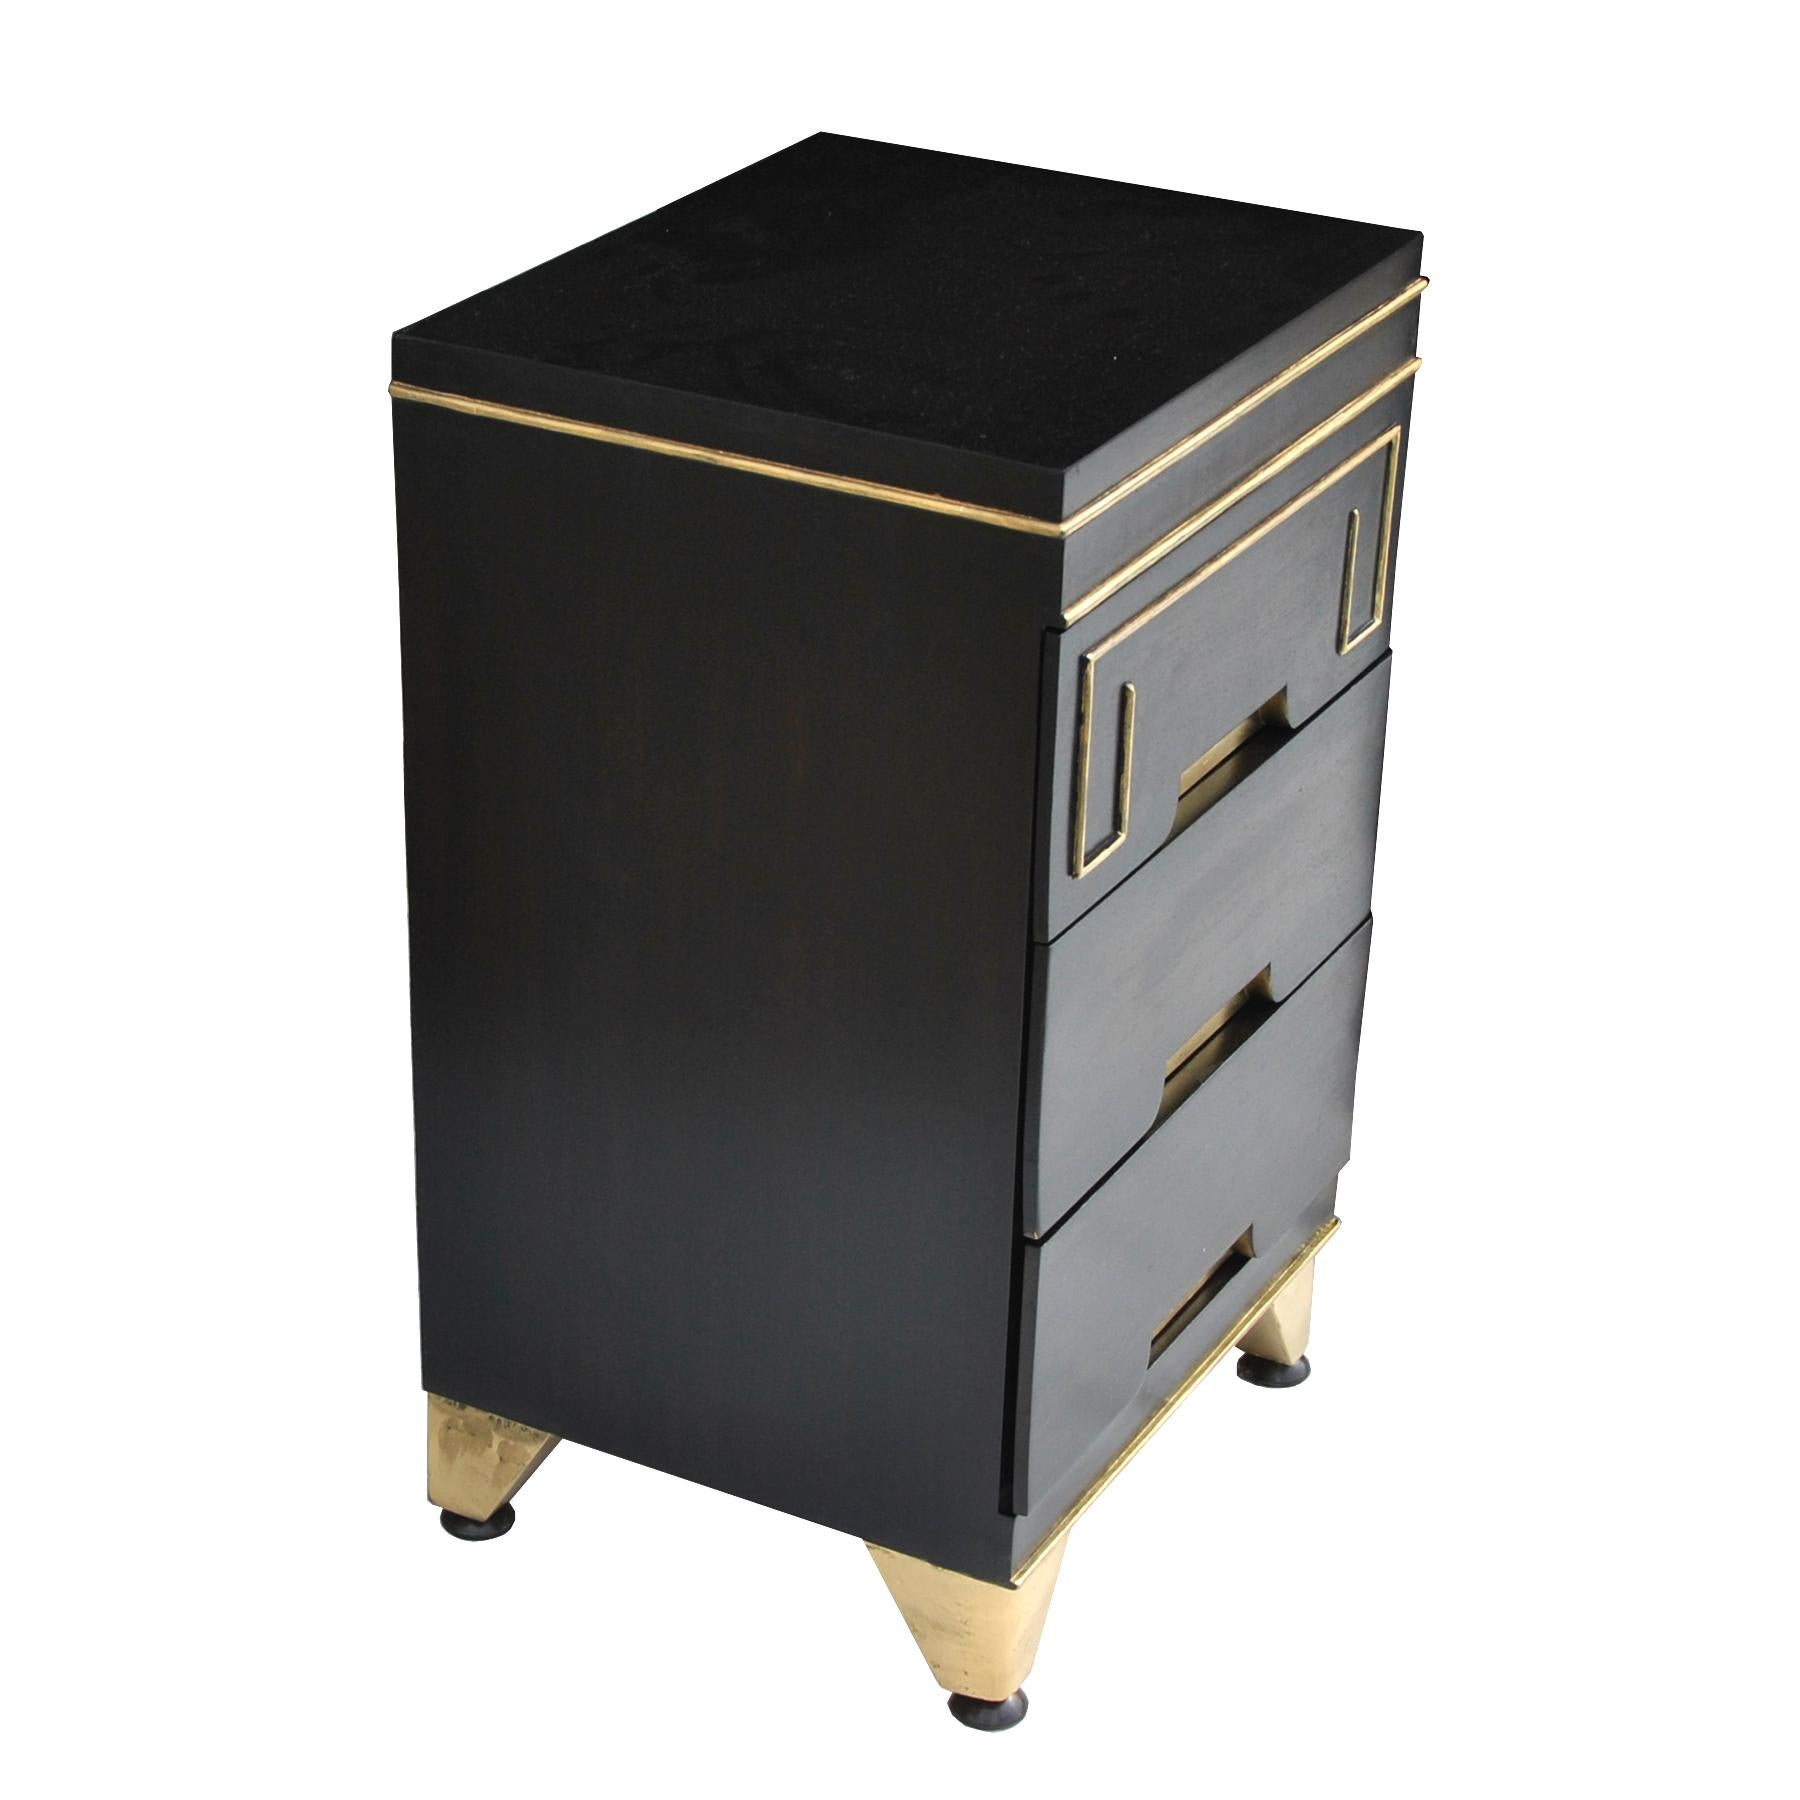 Hollywood Regency dresser

Ebonized 3-drawer nightstand with Greek key details. Recessed pulls and tapered legs accented in gold.

See matching dressers featured:
  